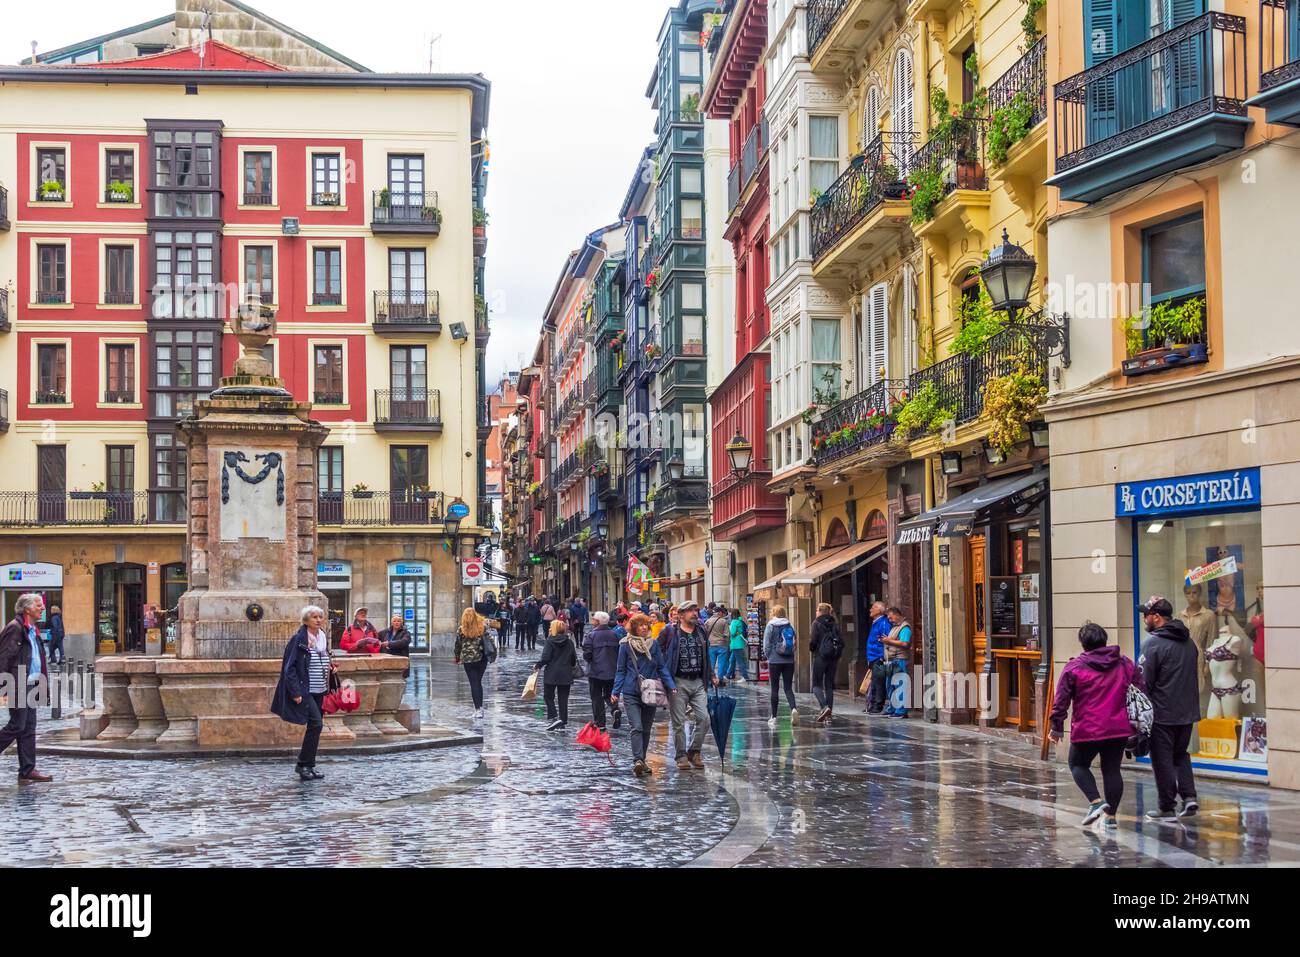 Cobblestone street in the old town in rain, Bilbao, Biscay Province, Basque County Autonomous Community, Spain Stock Photo